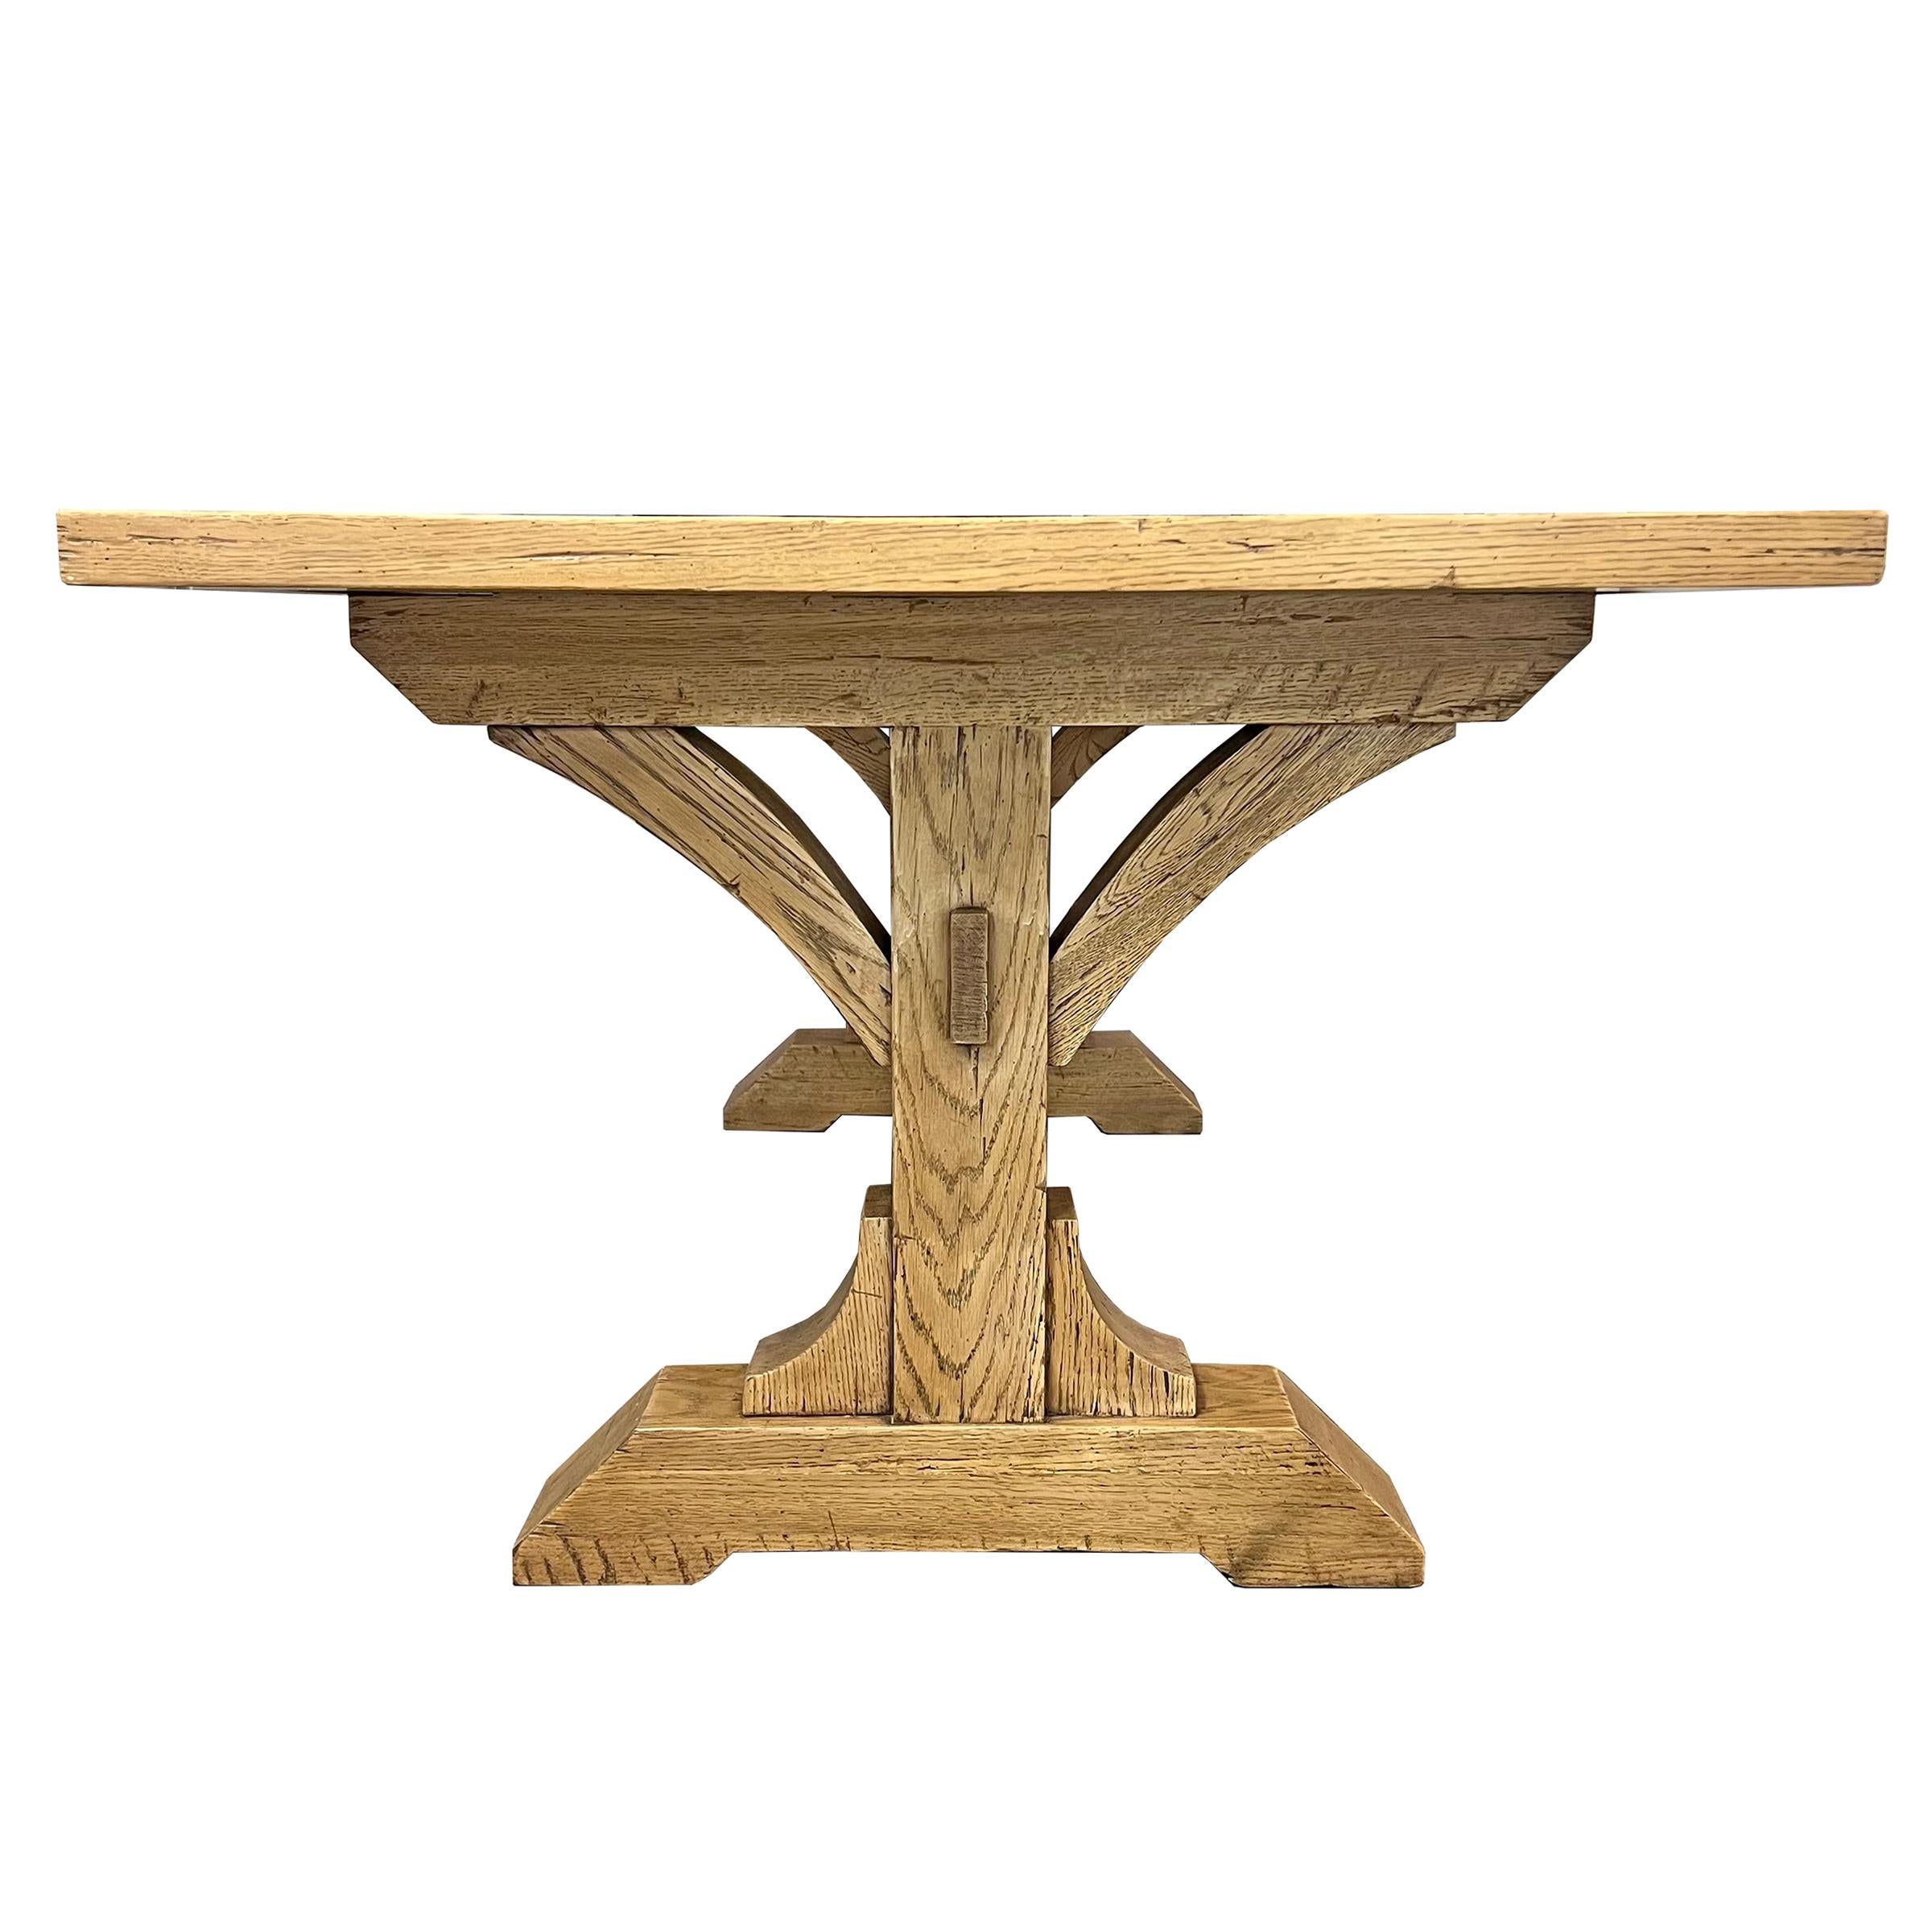 Hand-Crafted Solid Oak Timber Frame Trestle Table For Sale